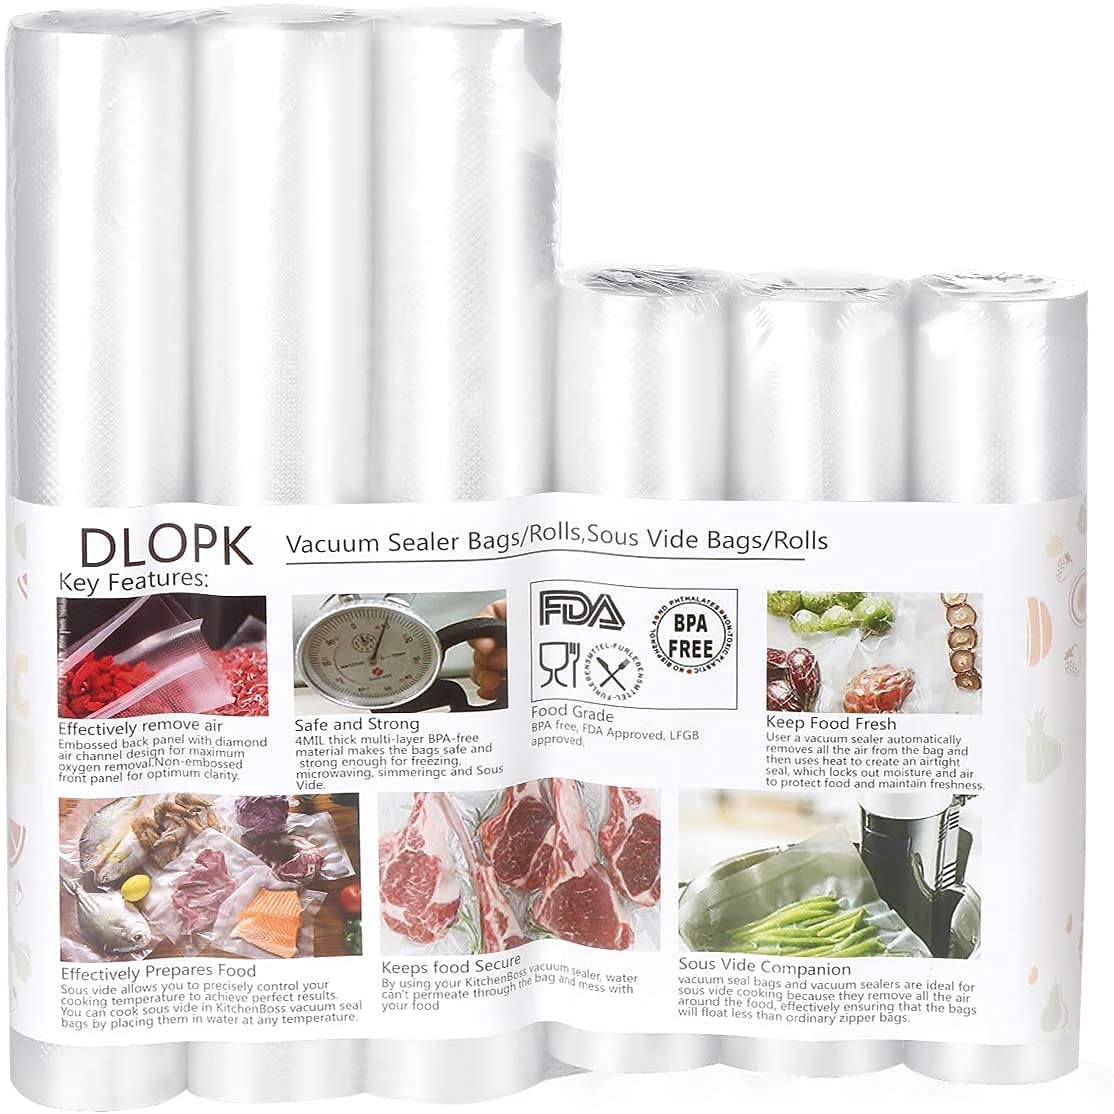 DLOPK Vacuum bags, vacuum bags, 6 rolls, 20 x 300 cm and 28 x 300 cm, foil rolls for all vacuum sealers, BPA-free, strong and tear-resistant, 150 µm, suitable for Sous Vide, reusable vacuum rolls